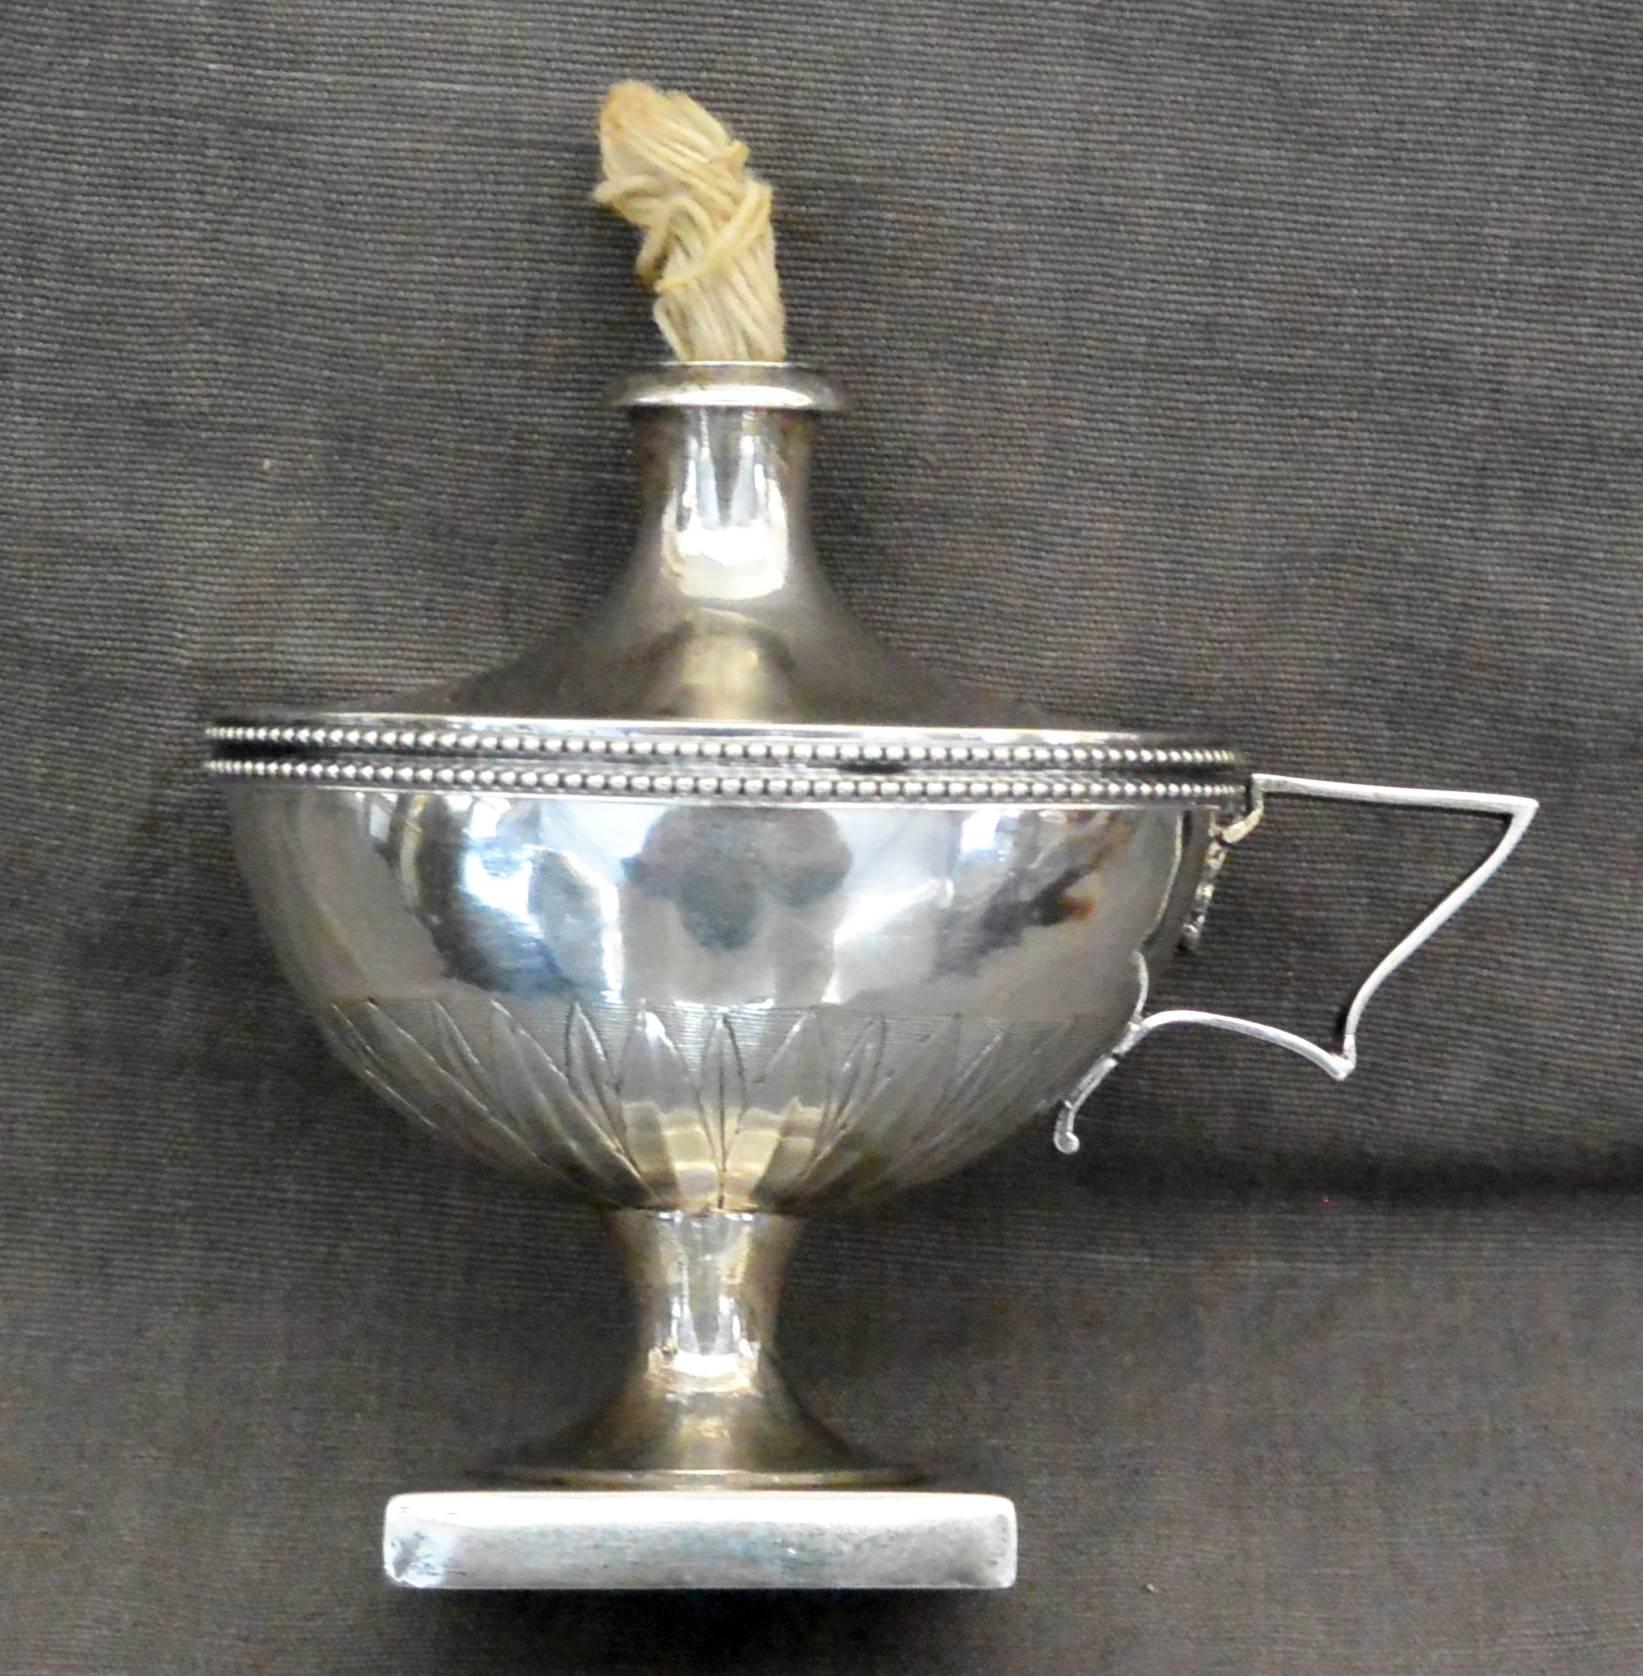 French Neoclassical Silver Oil Lamp. Antique French sterling silver oil lamp of neoclassical form with leaf and bead detailing on raised pedestal. French silver hallmarks, France, early 1800s. 
Dimension: 4.25